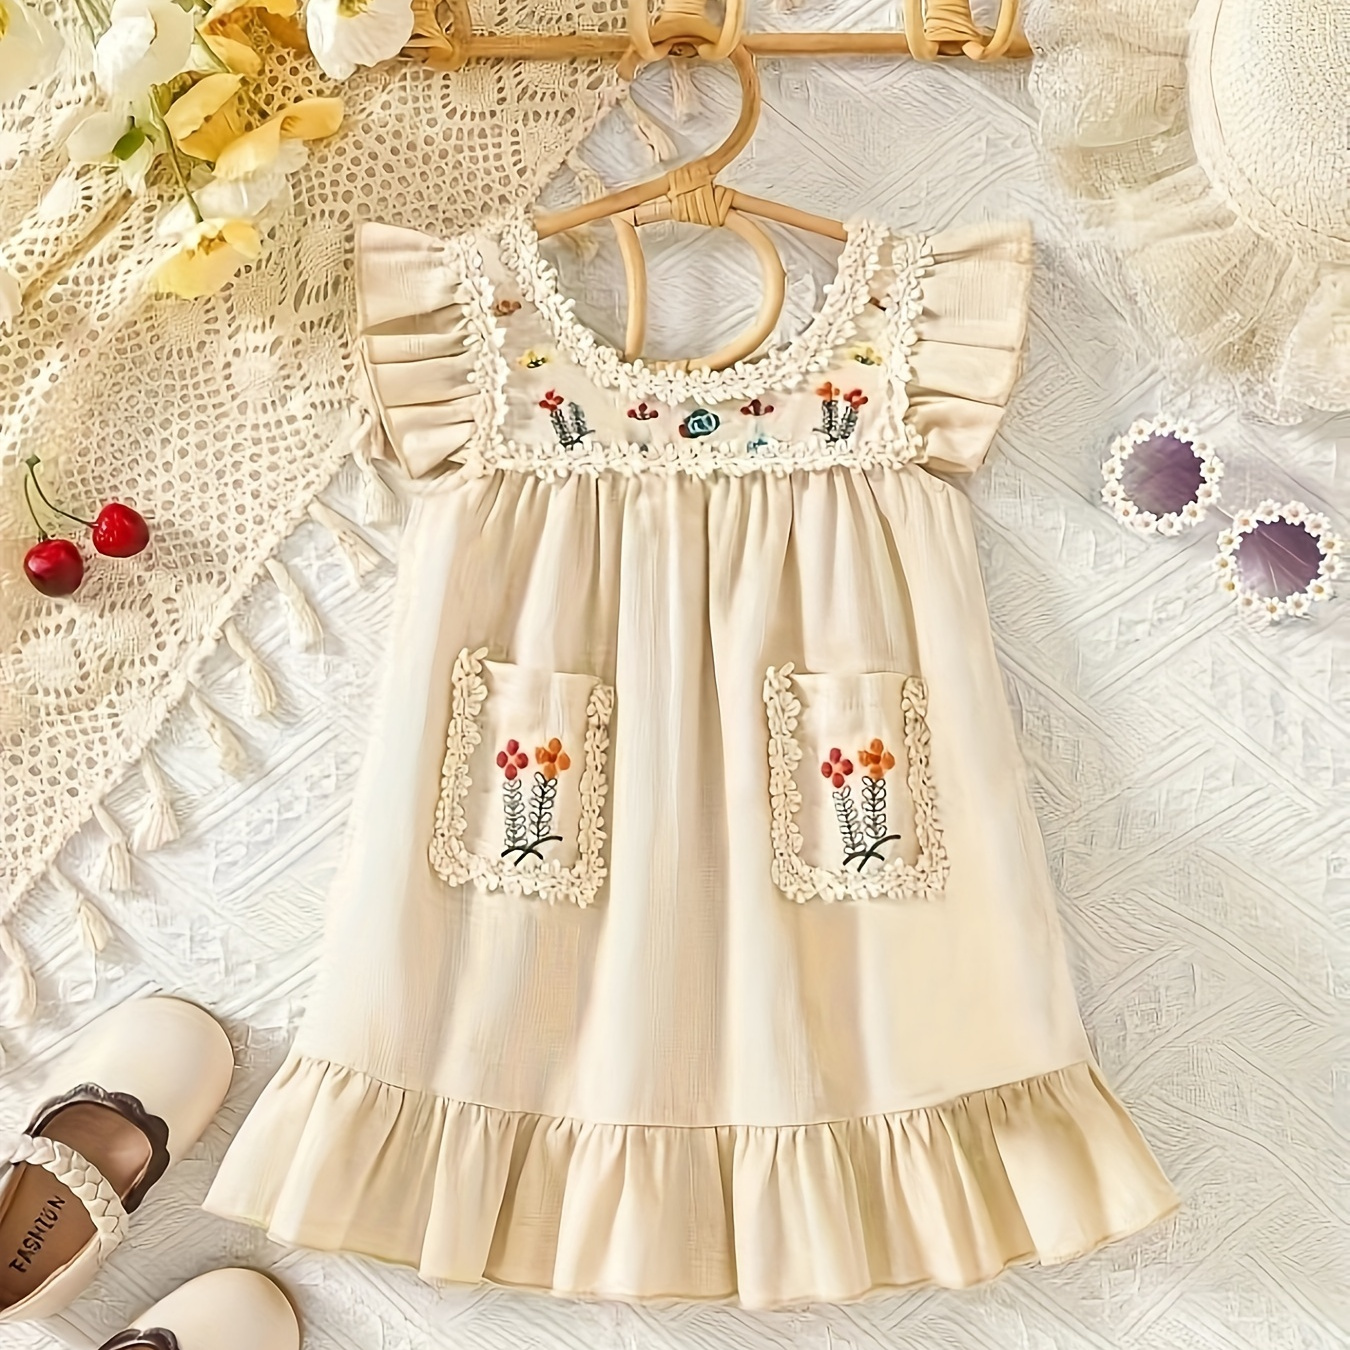 

Baby's Pastoral Style Flower Embroidered Ruffle Trim Cap Sleeve Dress, Infant & Toddler Girl's Clothing For Summer/spring, As Gift